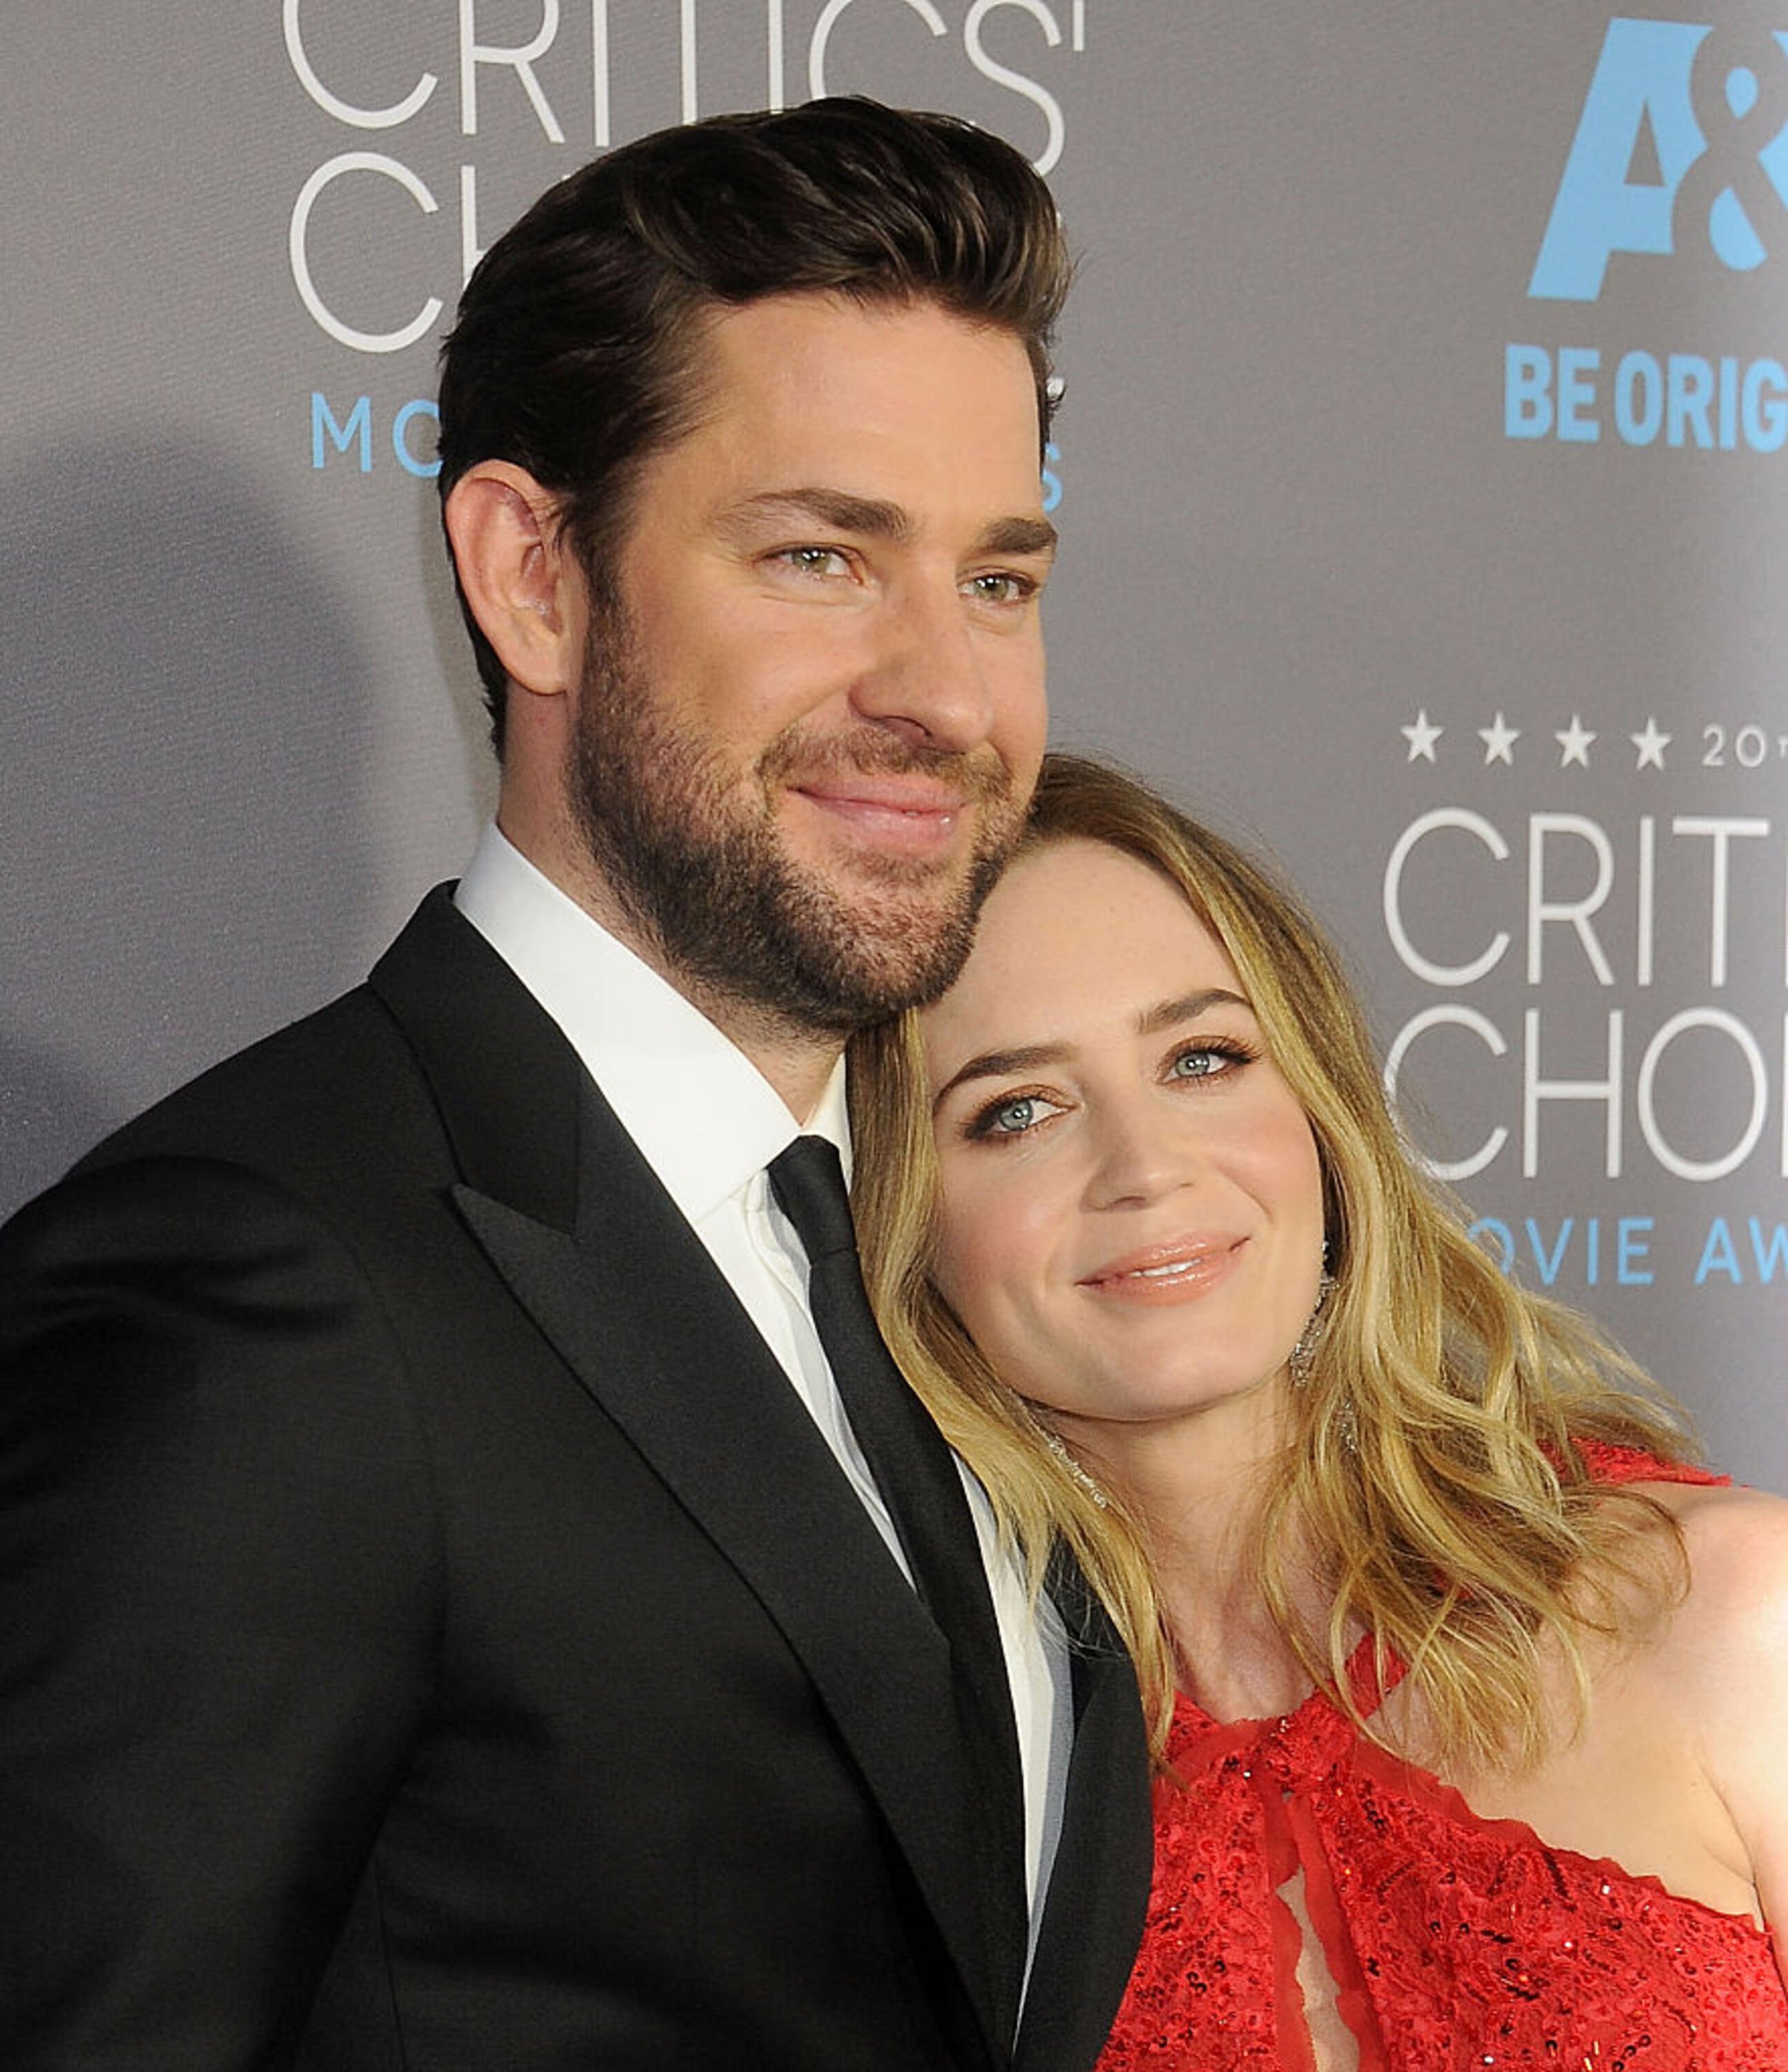 Emily Blunt and John Krasinski at the 20th Annual Critics' Choice Movie Awards on January 15, 2015, in Los Angeles | Source: Getty Images